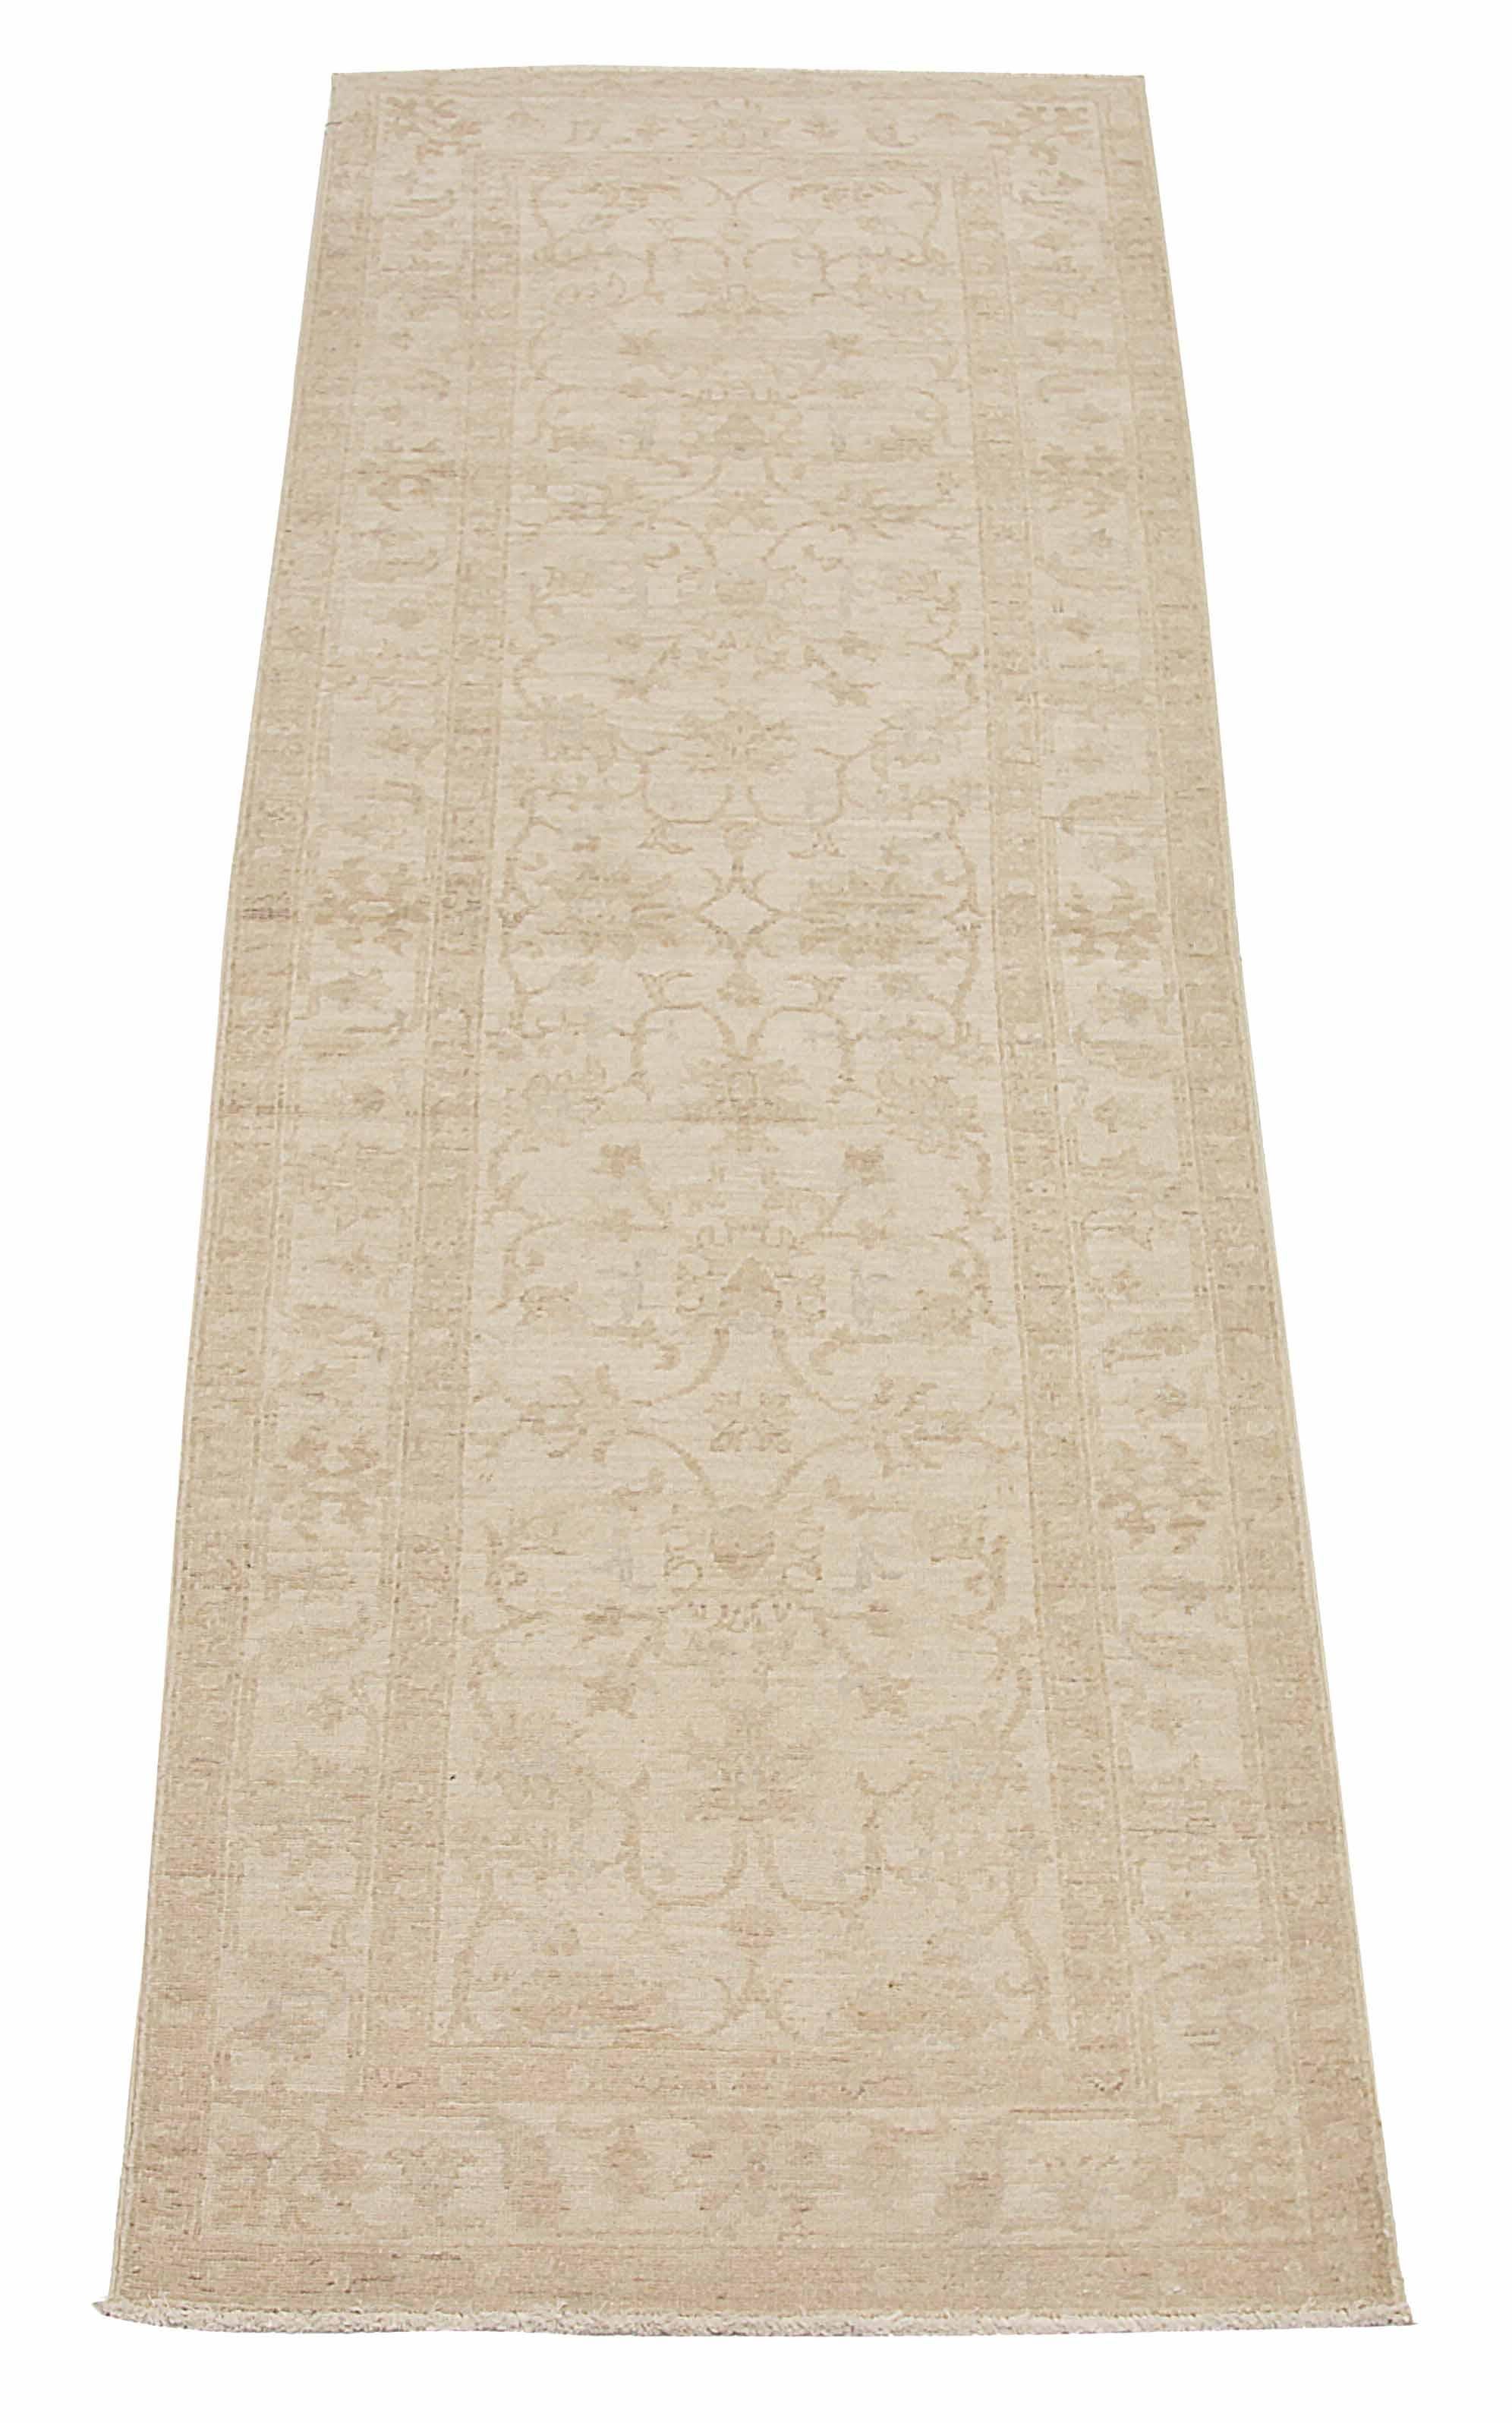 Afghan runner rug handwoven from the finest sheep’s wool. It’s colored with all-natural vegetable dyes that are safe for humans and pets. It’s a traditional Farahan design handwoven by expert artisans. It’s a lovely runner rug that can be